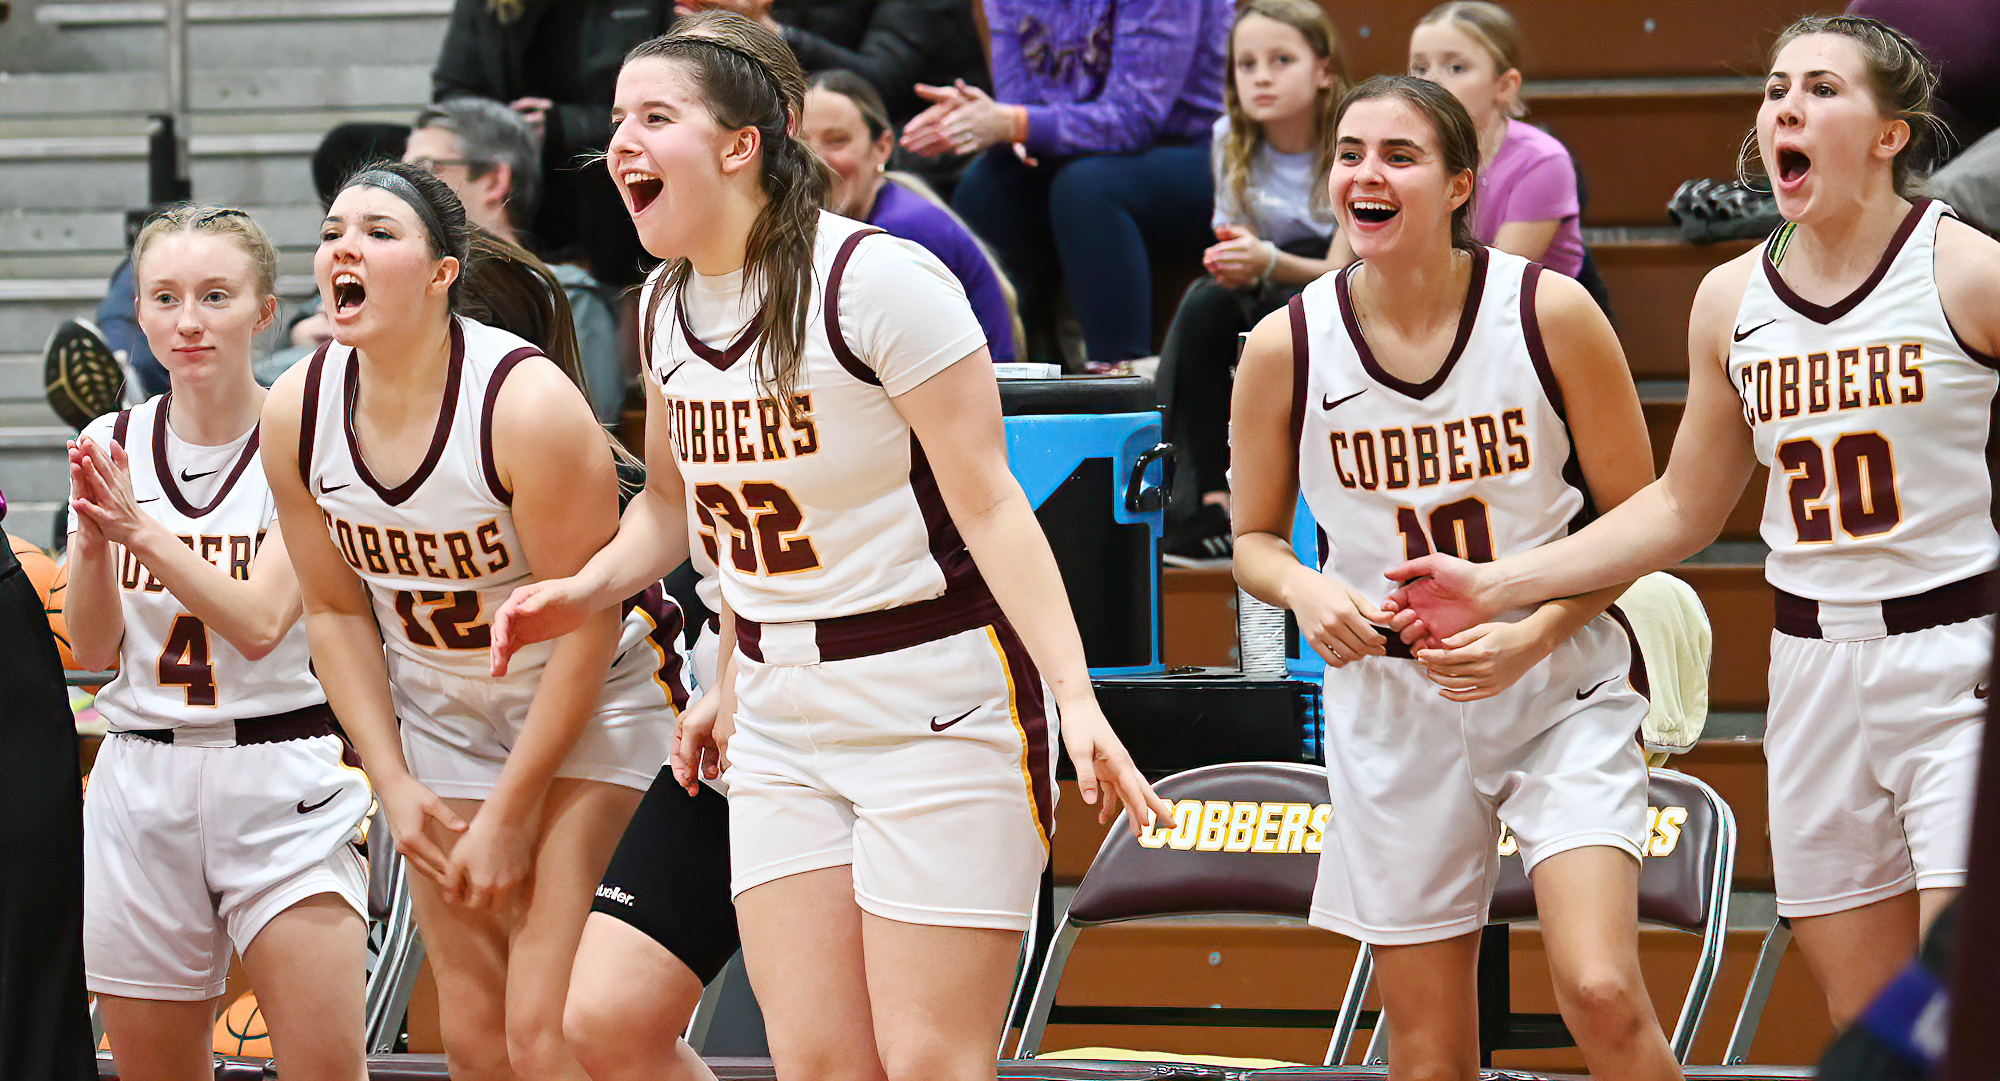 The Cobber bench celebrates Maci Wheeldon's free throw that gave the team 100 points in their conference victory over St. Catherine.